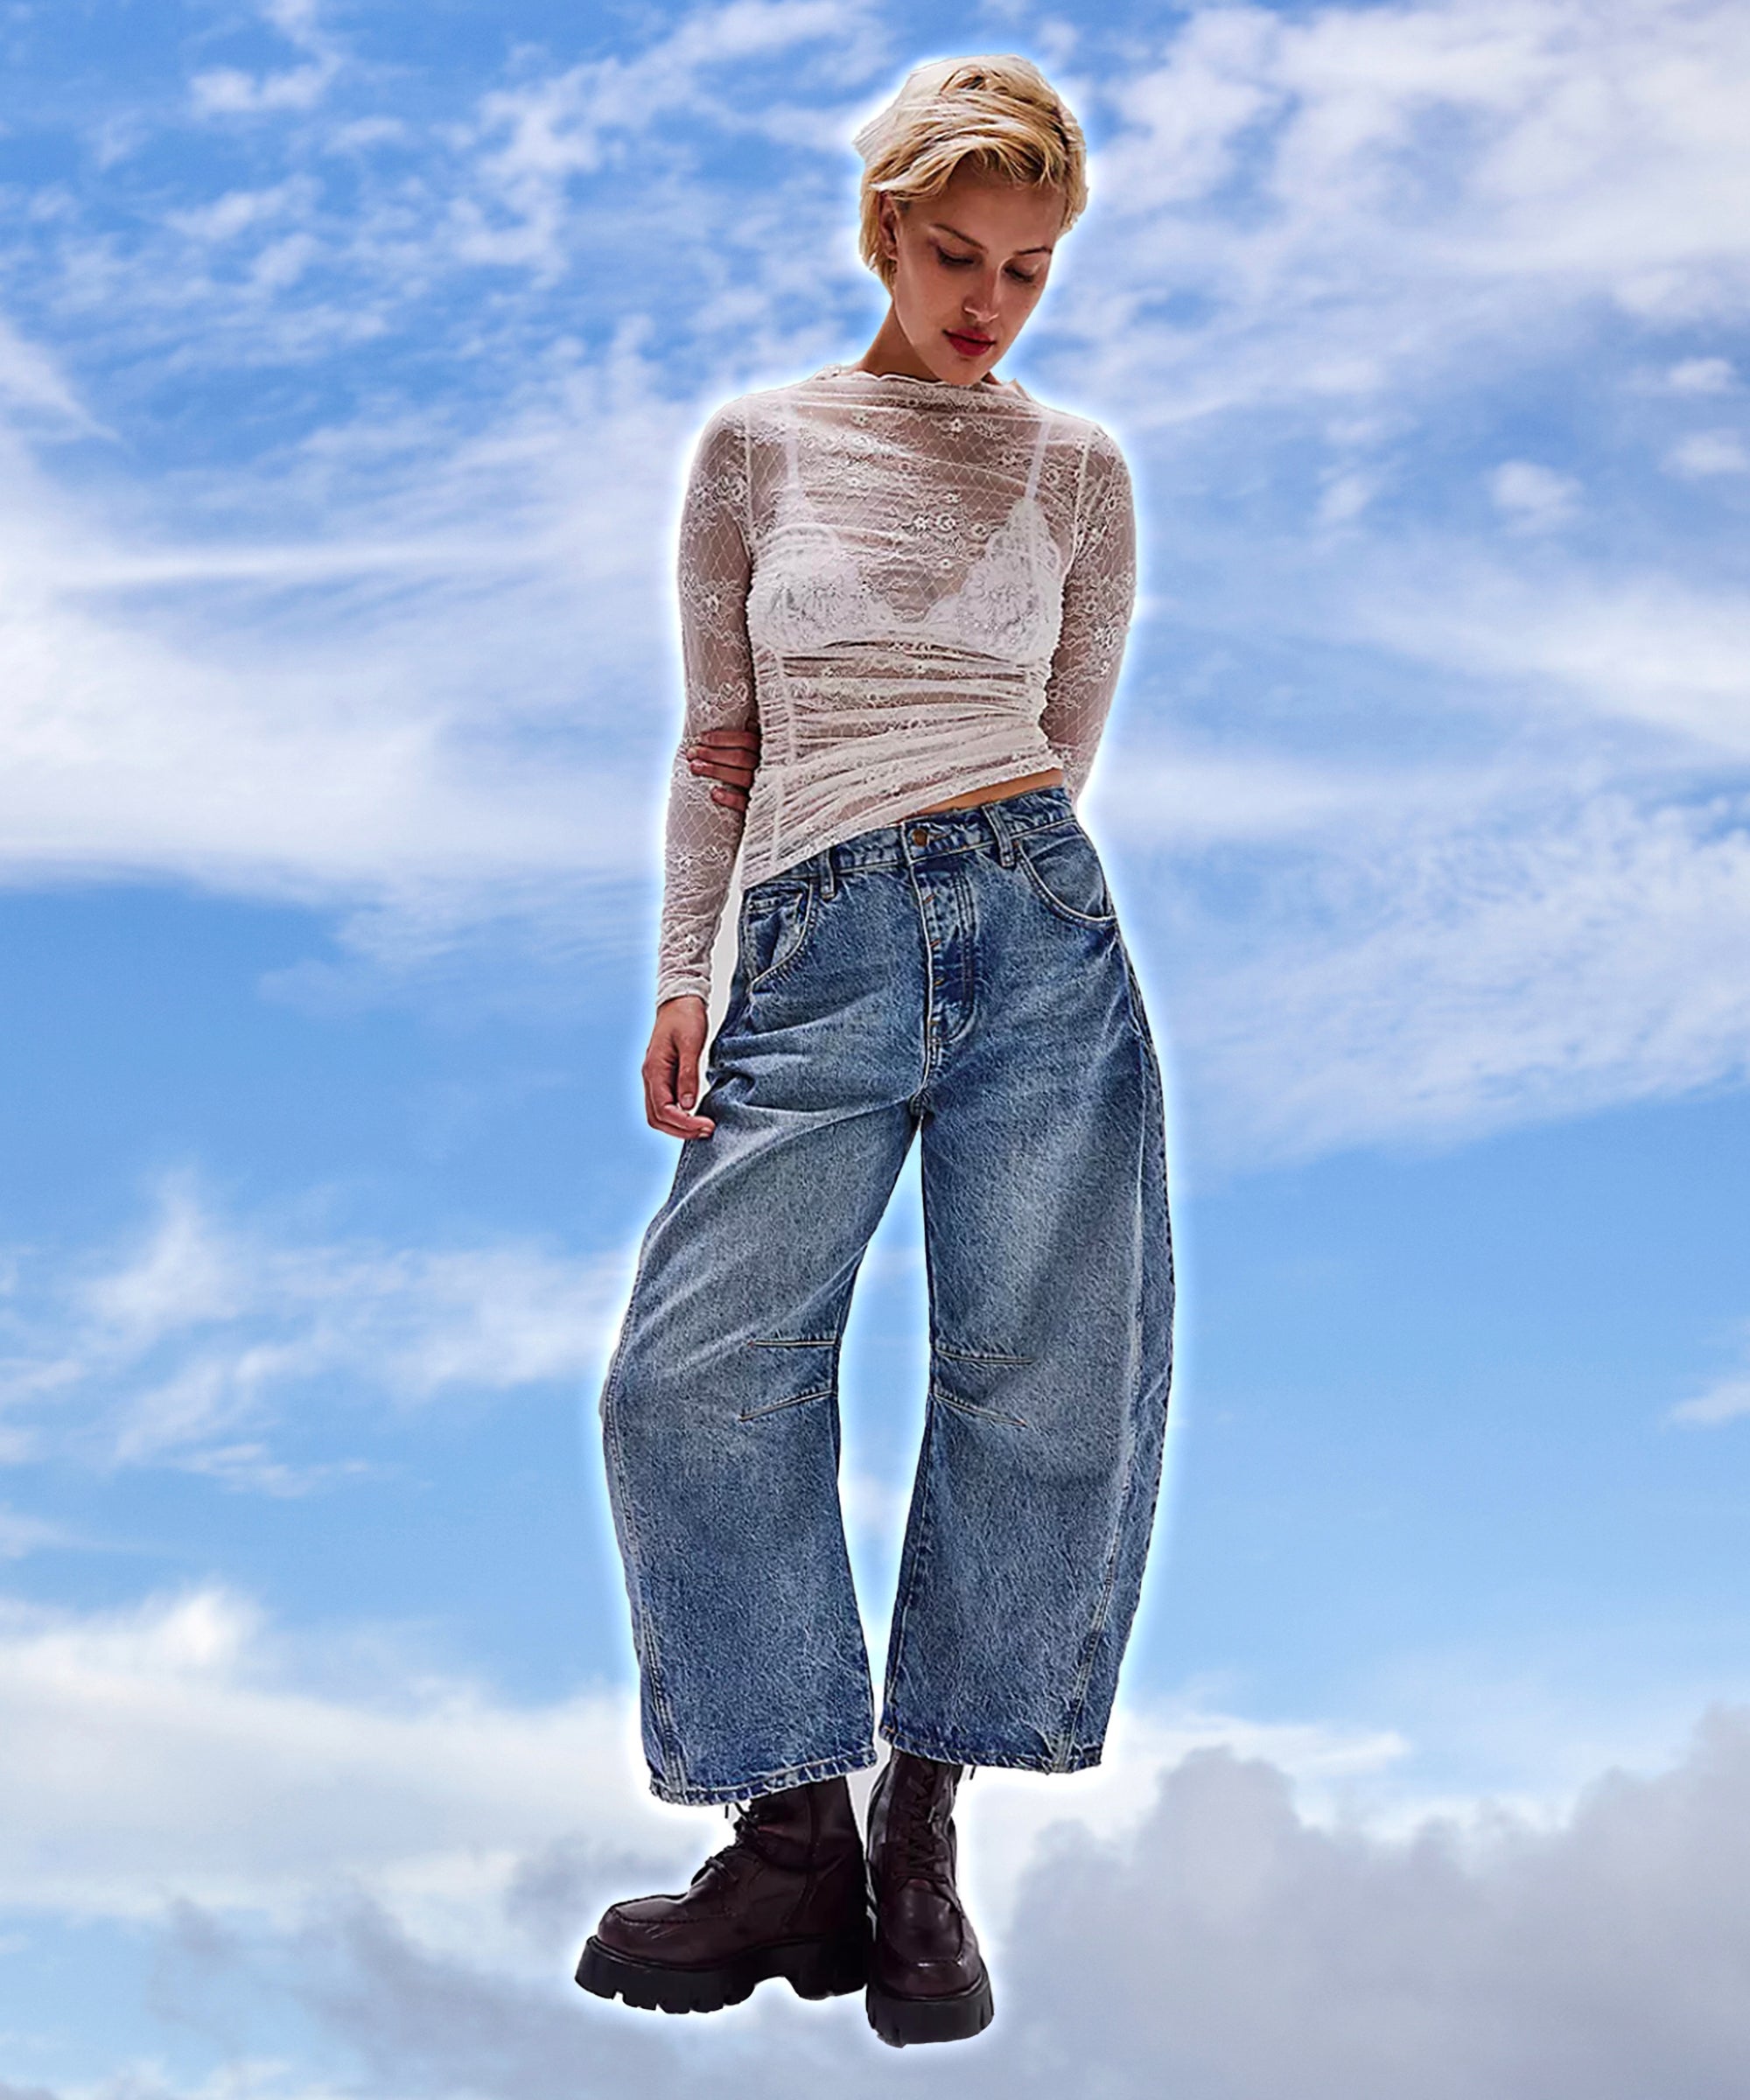 Women's Jeans - High Rise, Relaxed Fit, Skinny & More | Lucky Brand